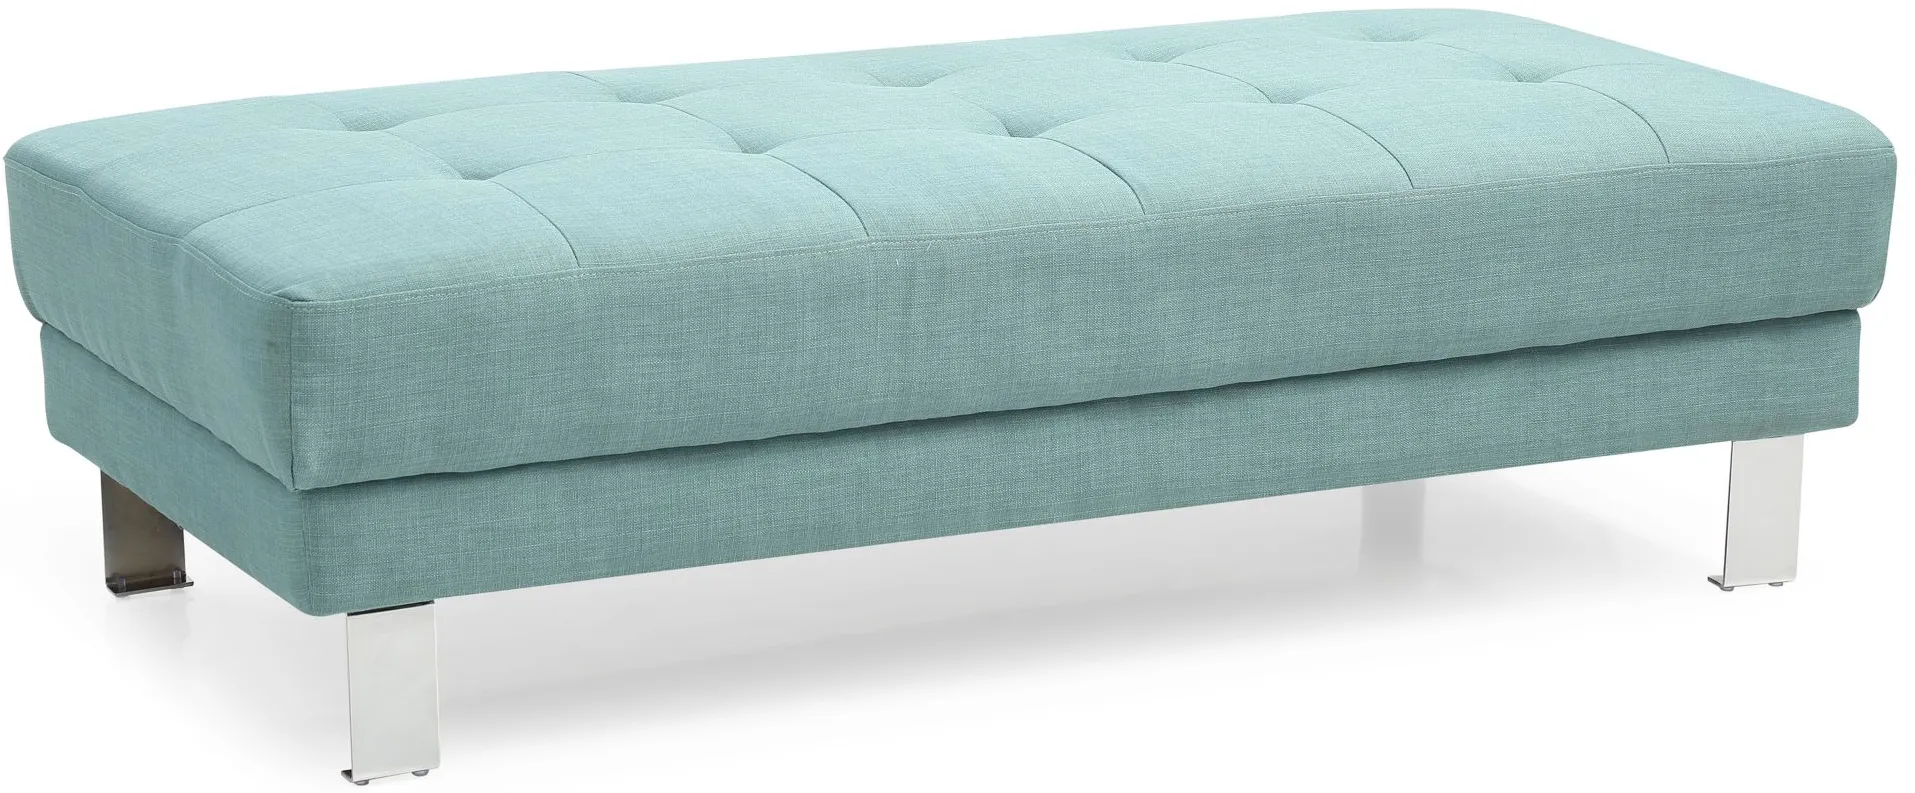 Riveredge Ottoman in Teal by Glory Furniture